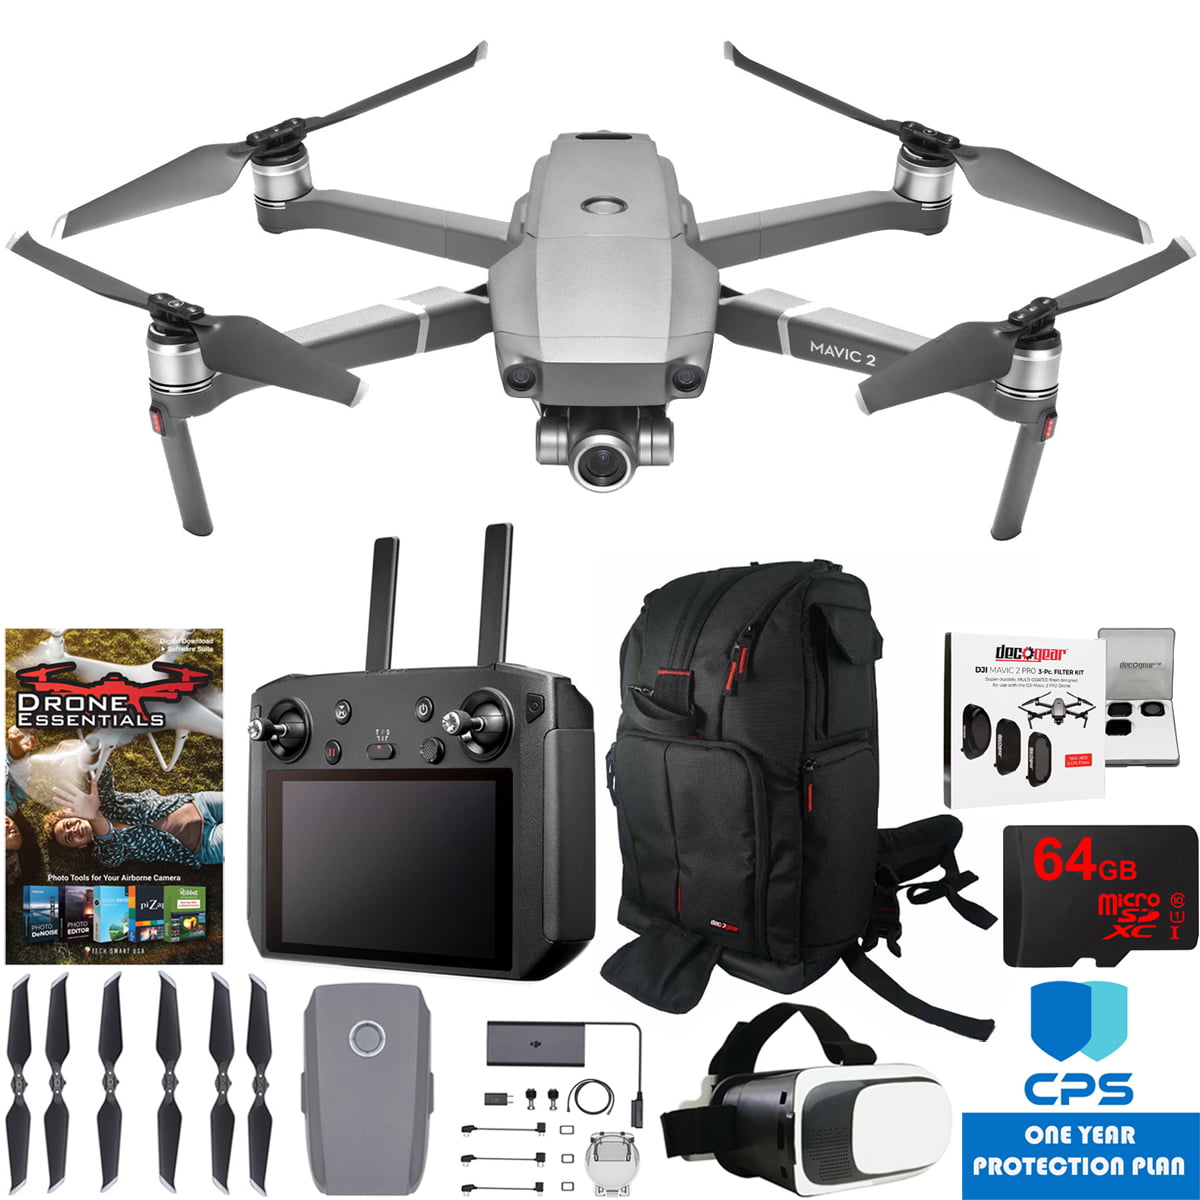 Akademi Reception Bolt DJI Mavic 2 Zoom Drone with with 24-48mm Lens Camera Smart Controller  Essential Go Bundle with Backpack, Filter Kit, VR FPV Goggles, 64GB SDXC  Card, Software Pack and 1 Year Warranty Extension -